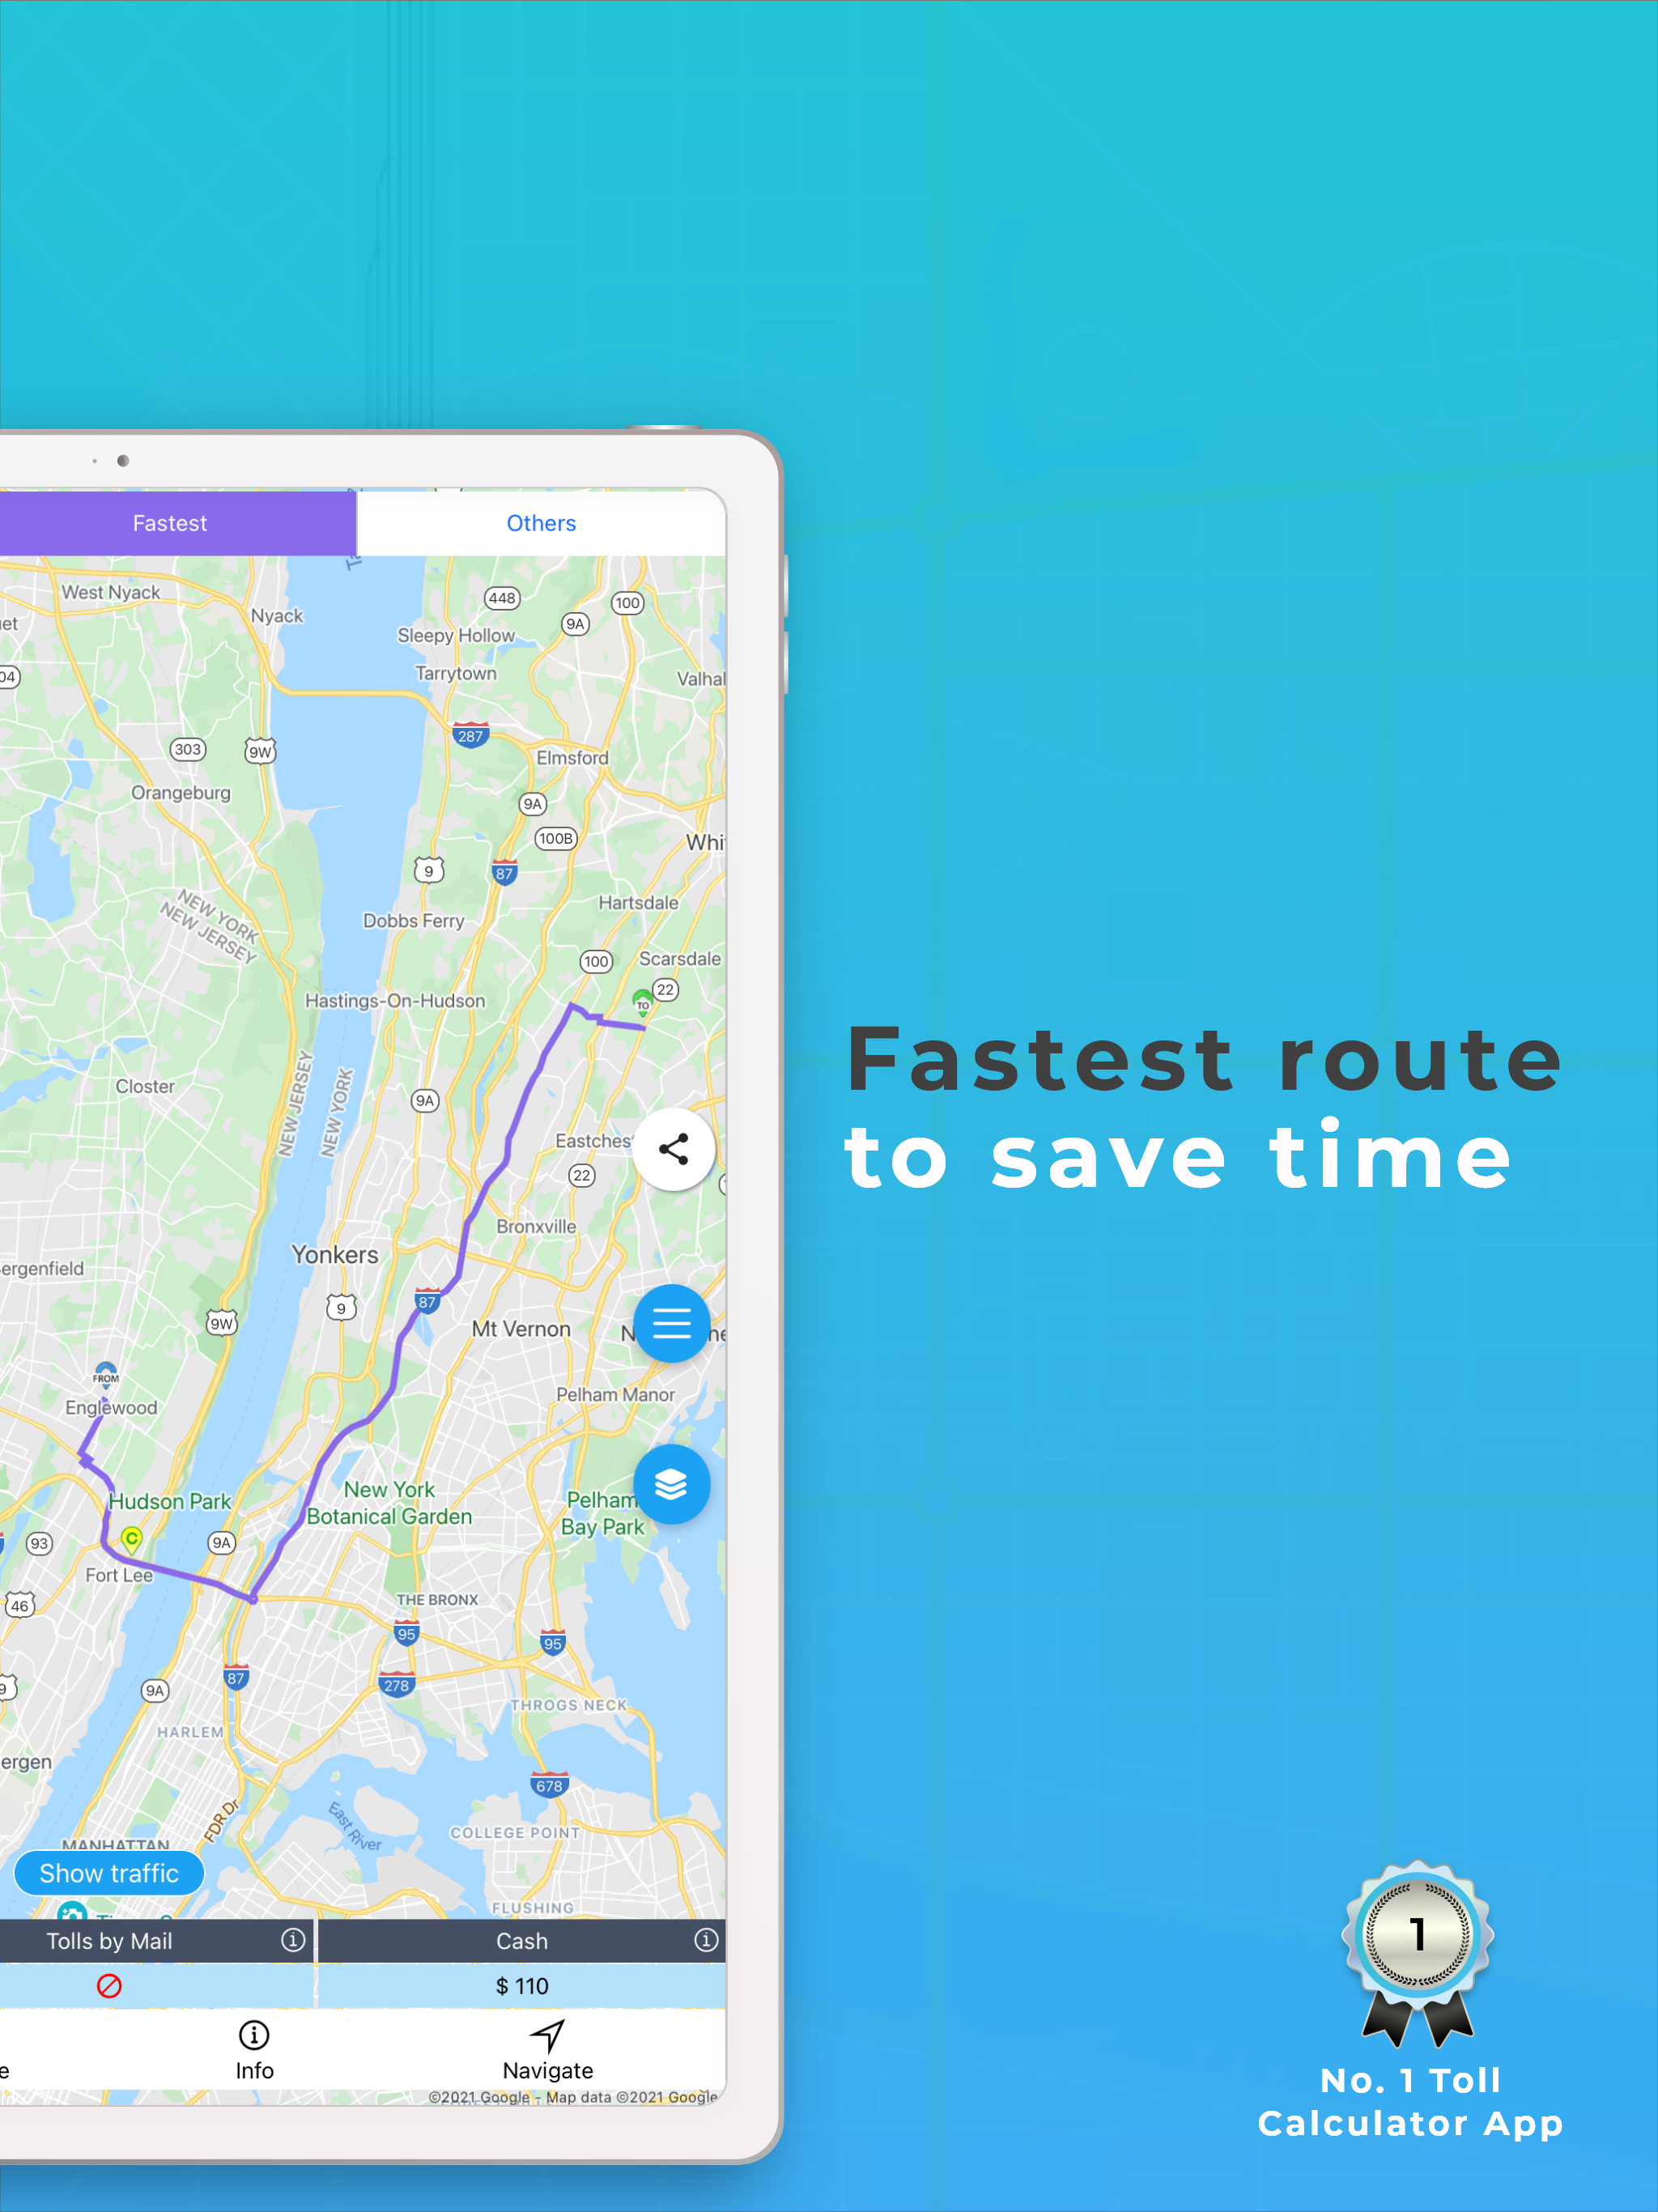 See Fastest route and save time